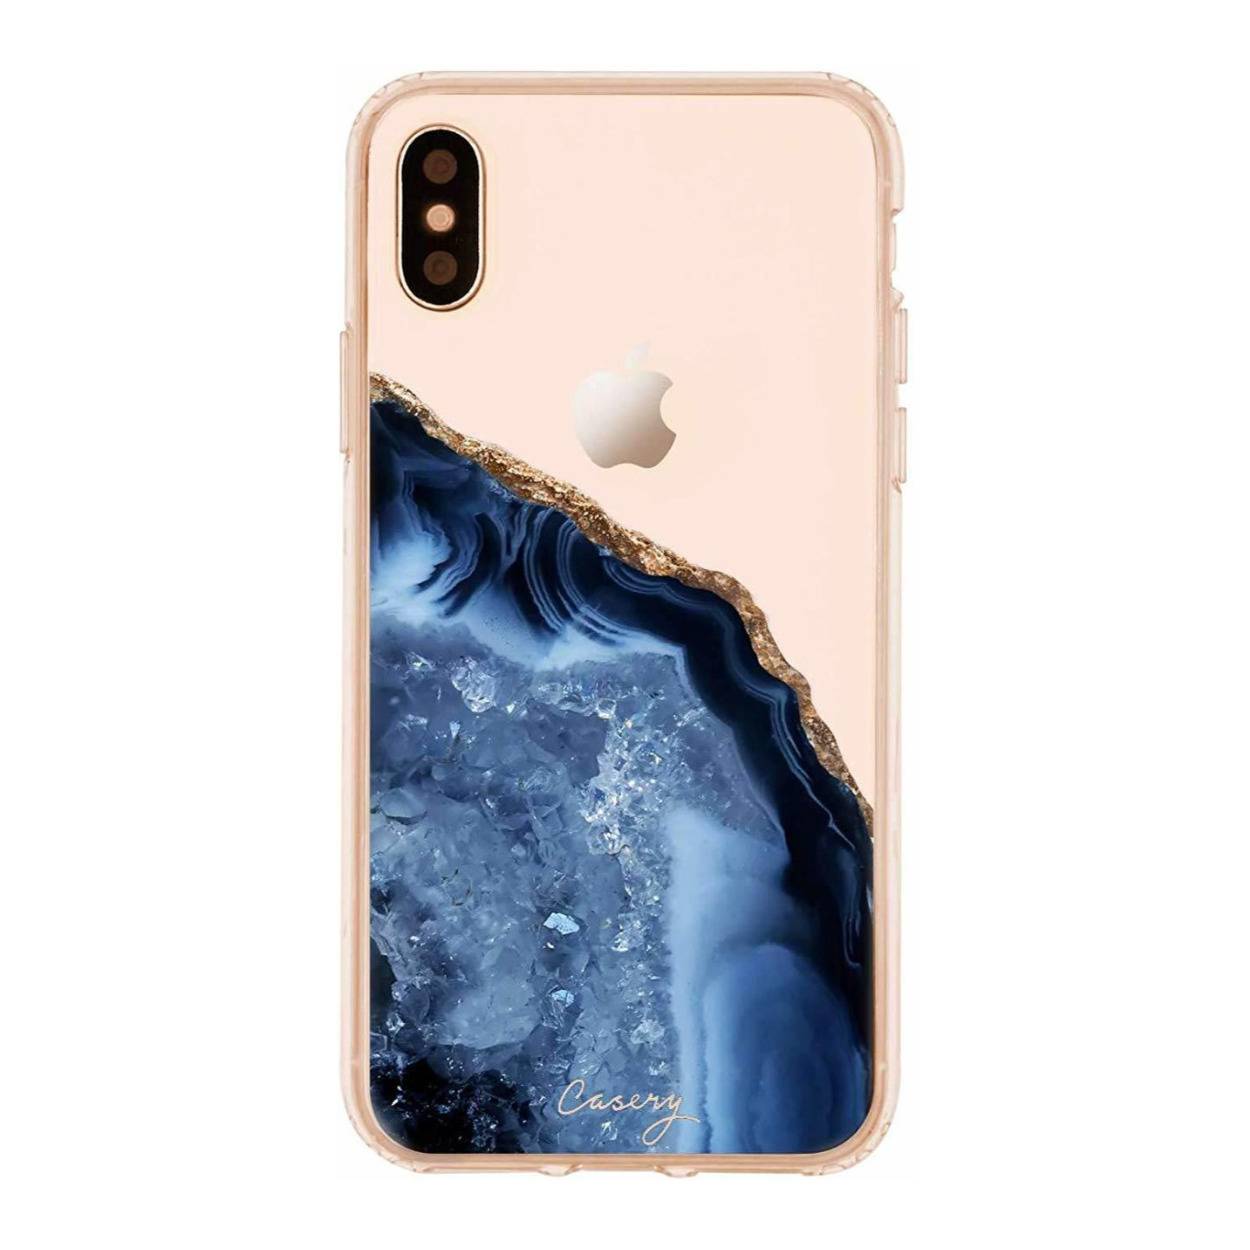 Casery iPhone Case for iPhone X/XS (Dark Blue Agate)